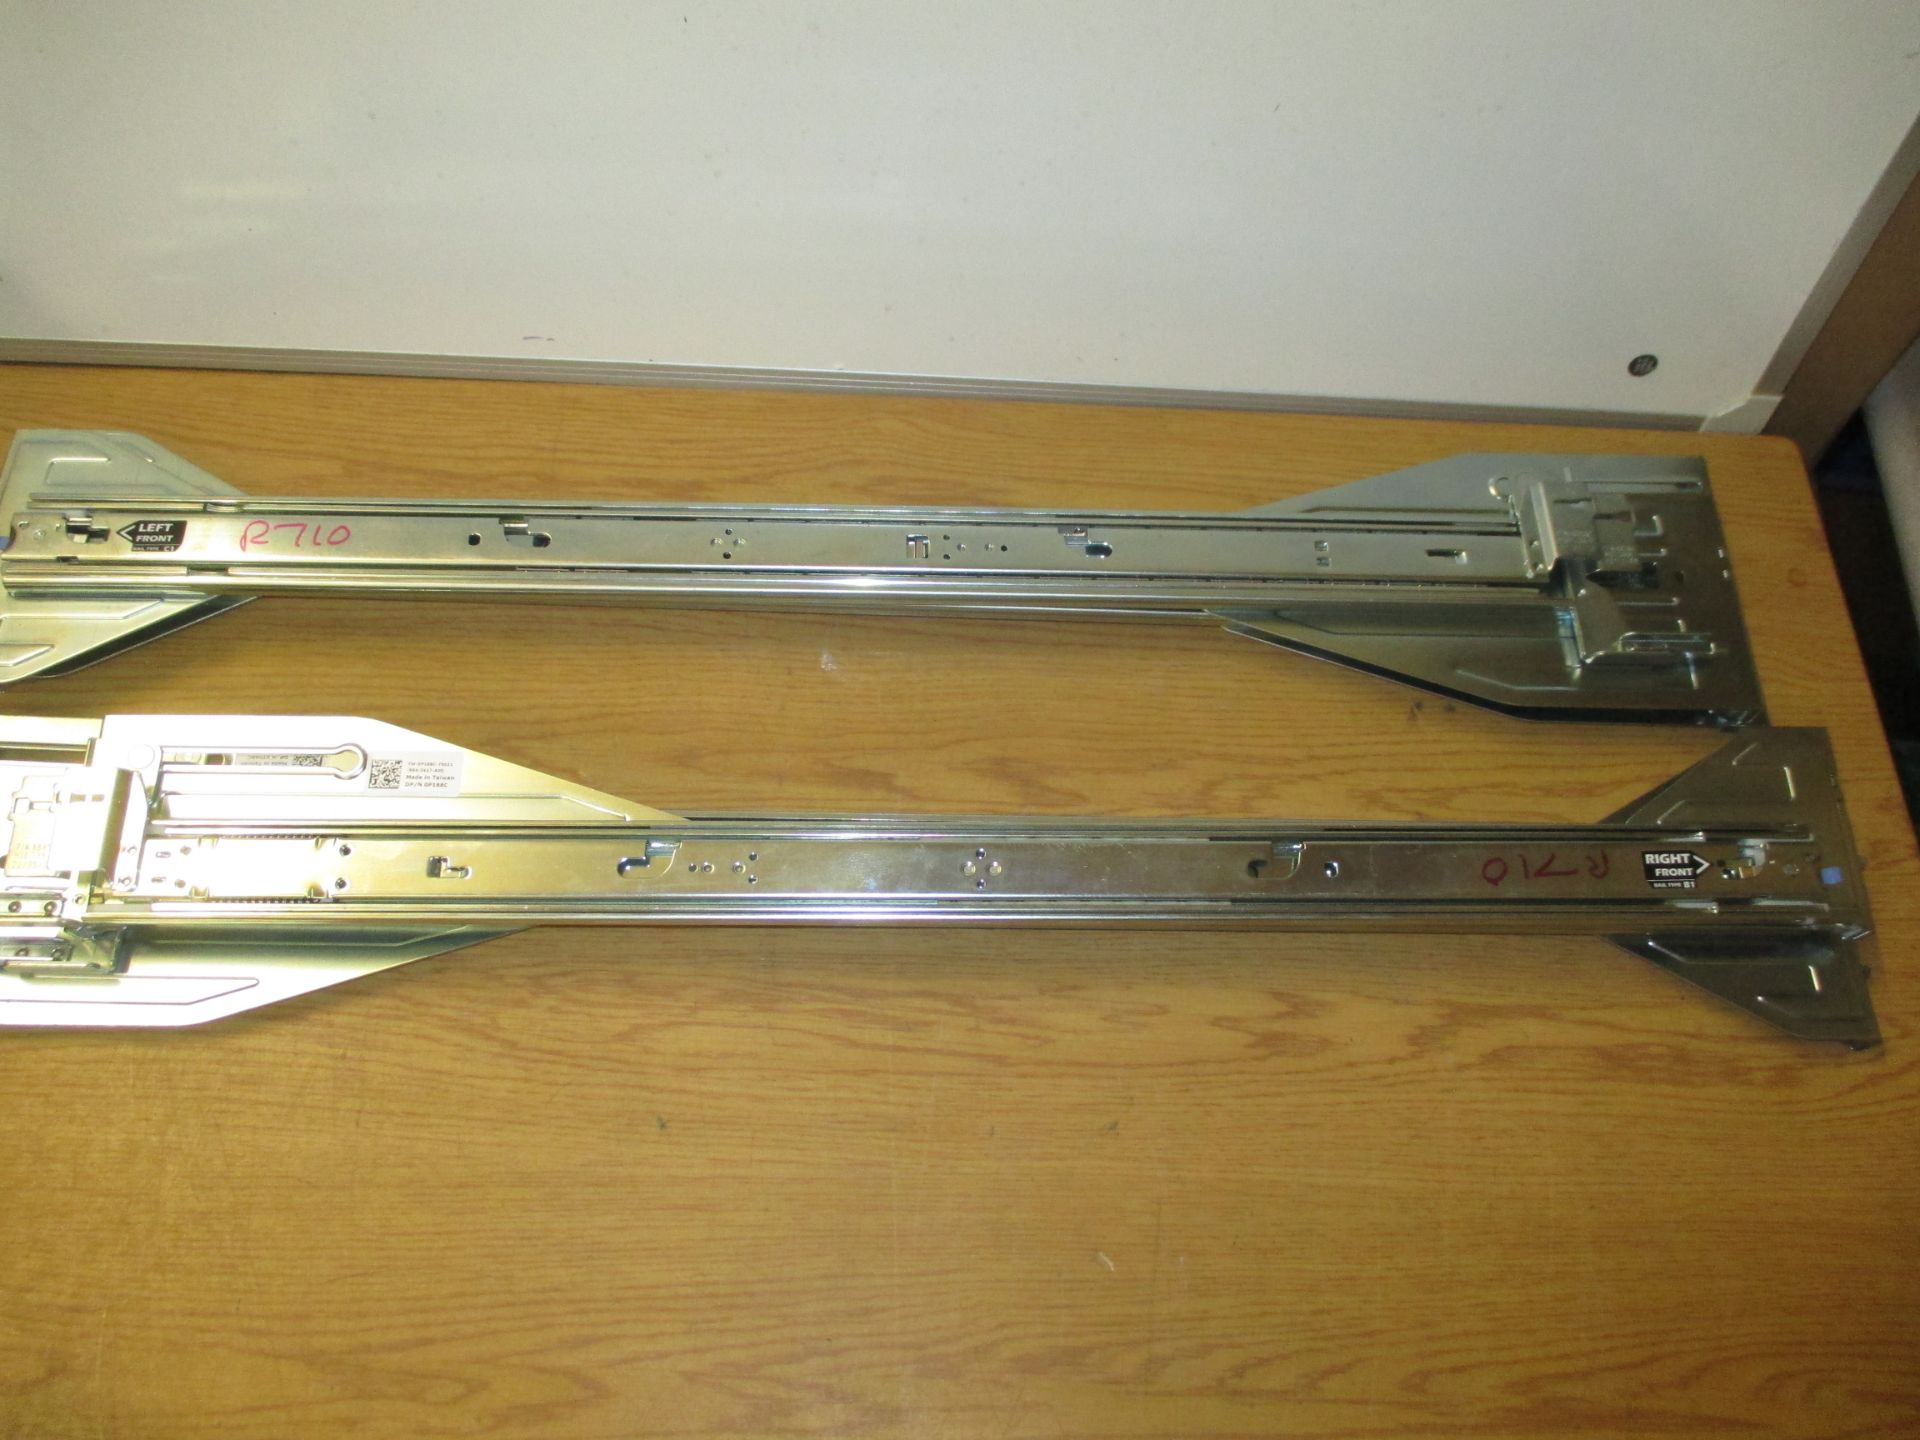 2 x PAIRS OF RACKMOUNT RAILS FOR DELL POWEREDGE R710 SERVERS